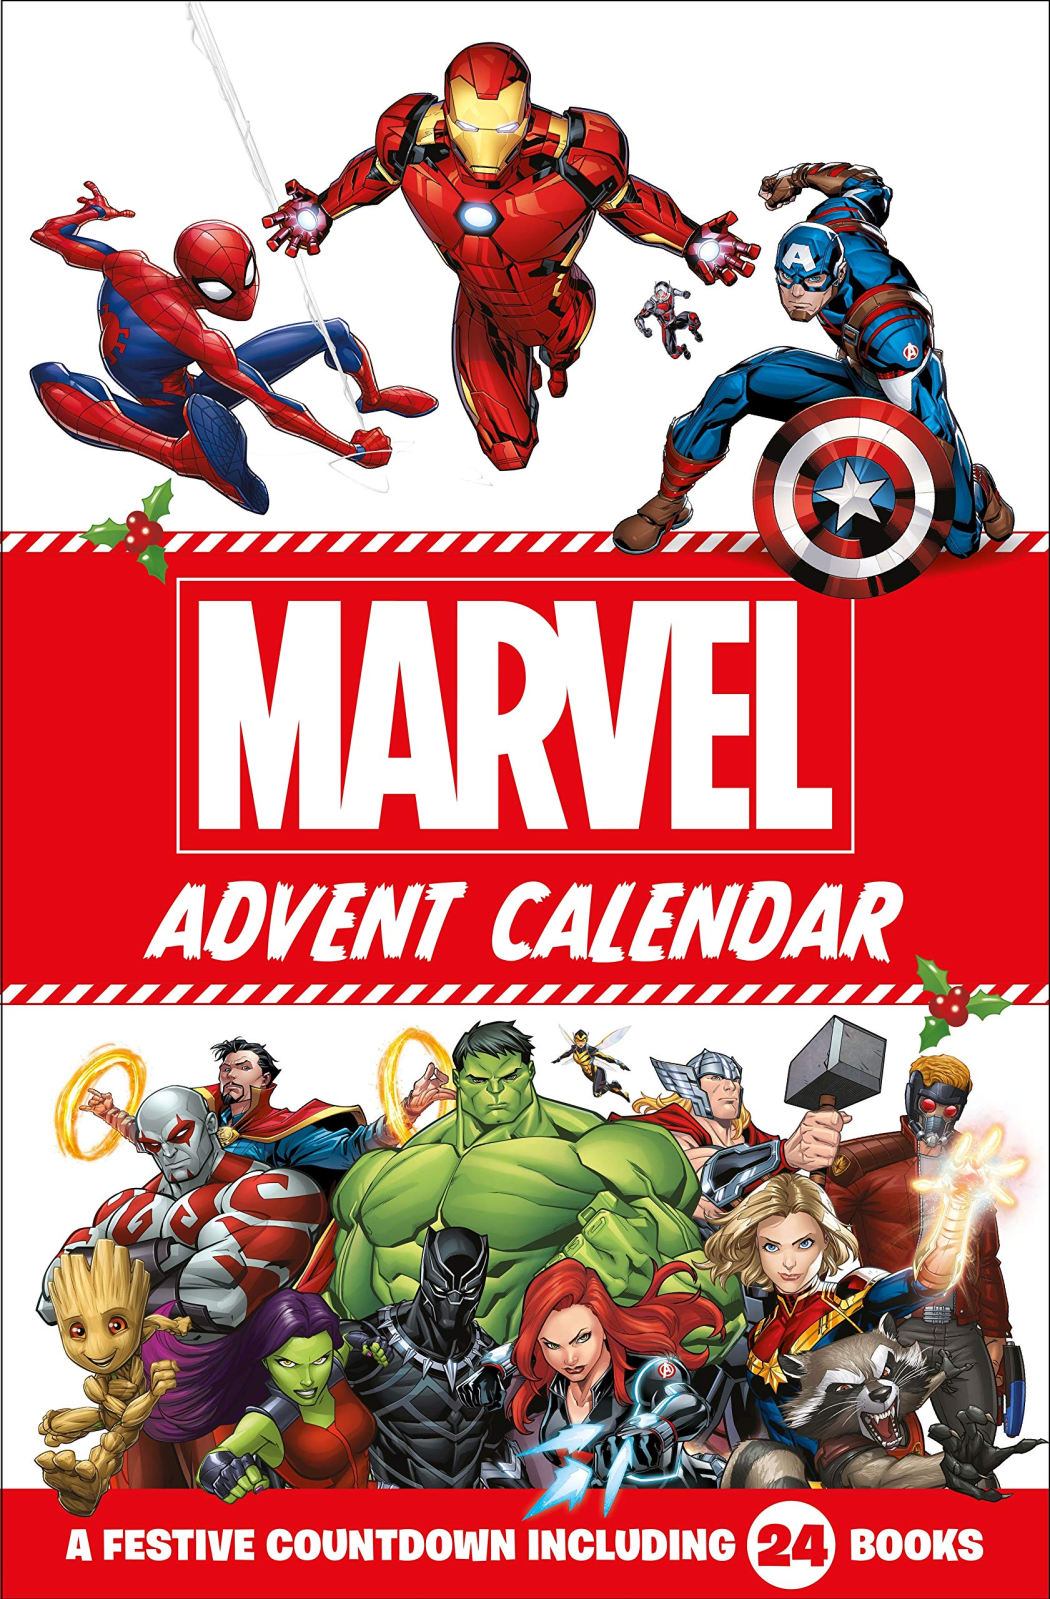 2020 Marvel Storybook Advent Calendar Available Now + Full Spoilers